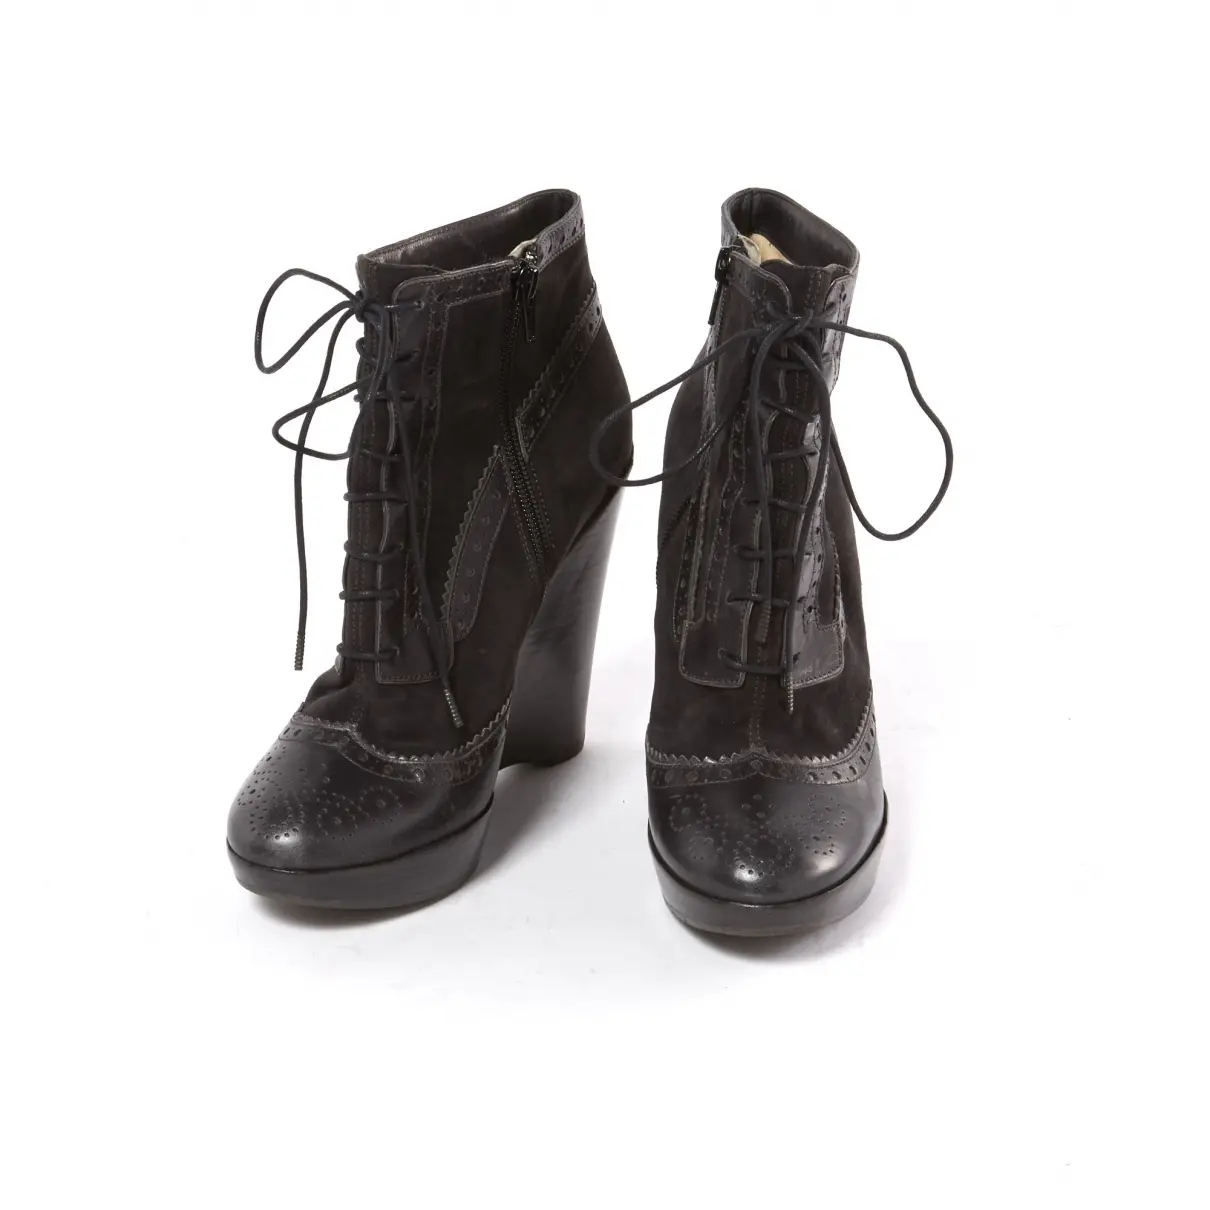 Cerruti LACED BOOTS for sale